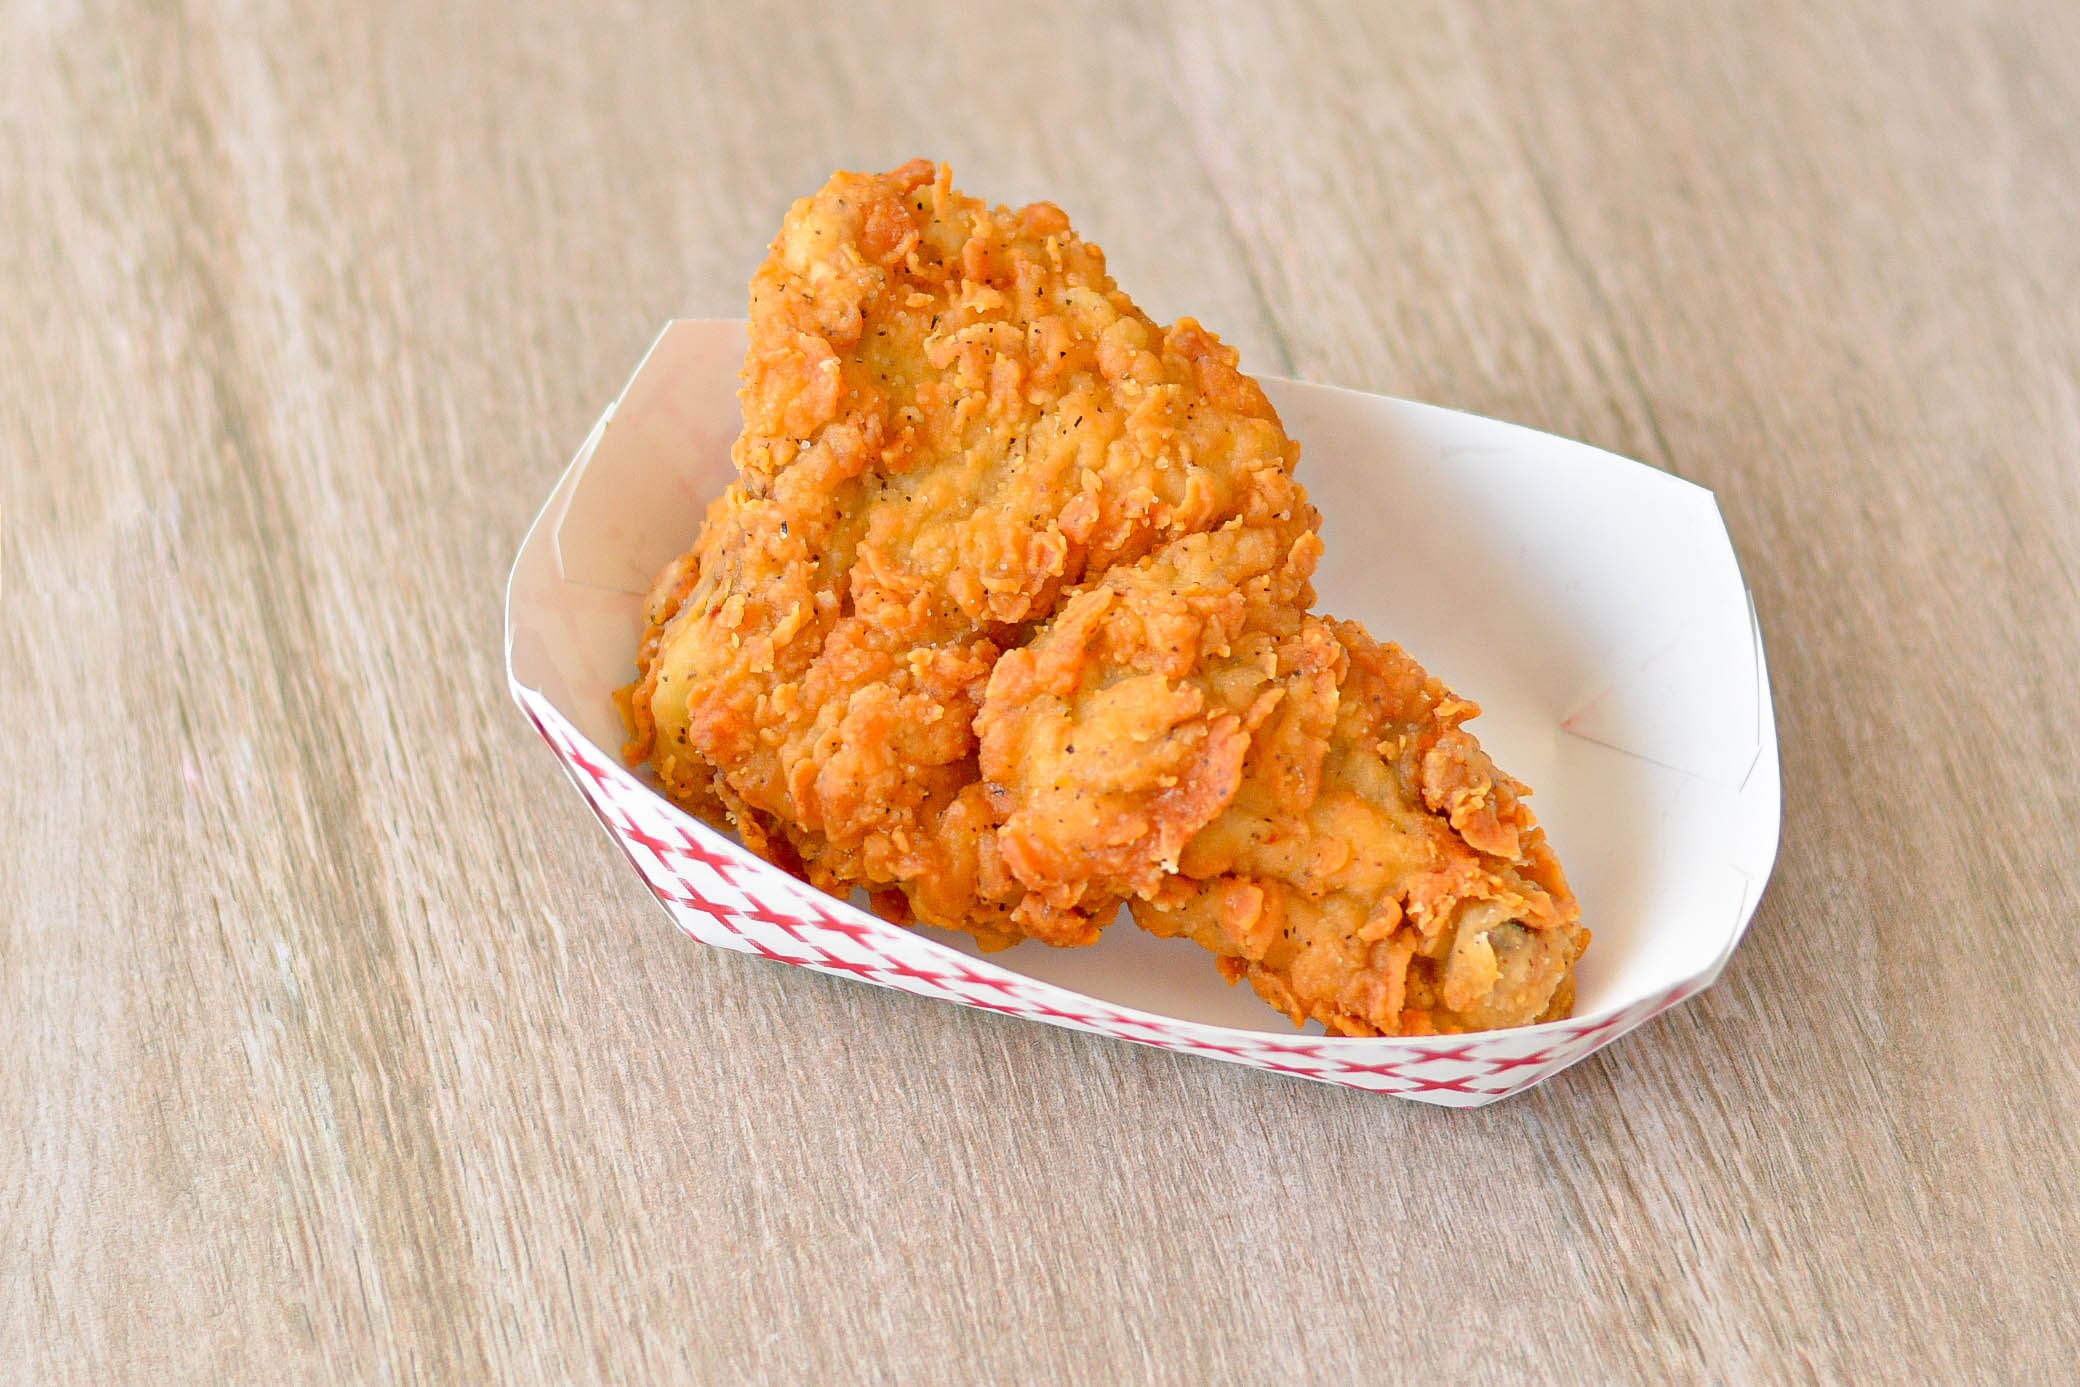 Delicious Dinner Options: Fried Chicken and More